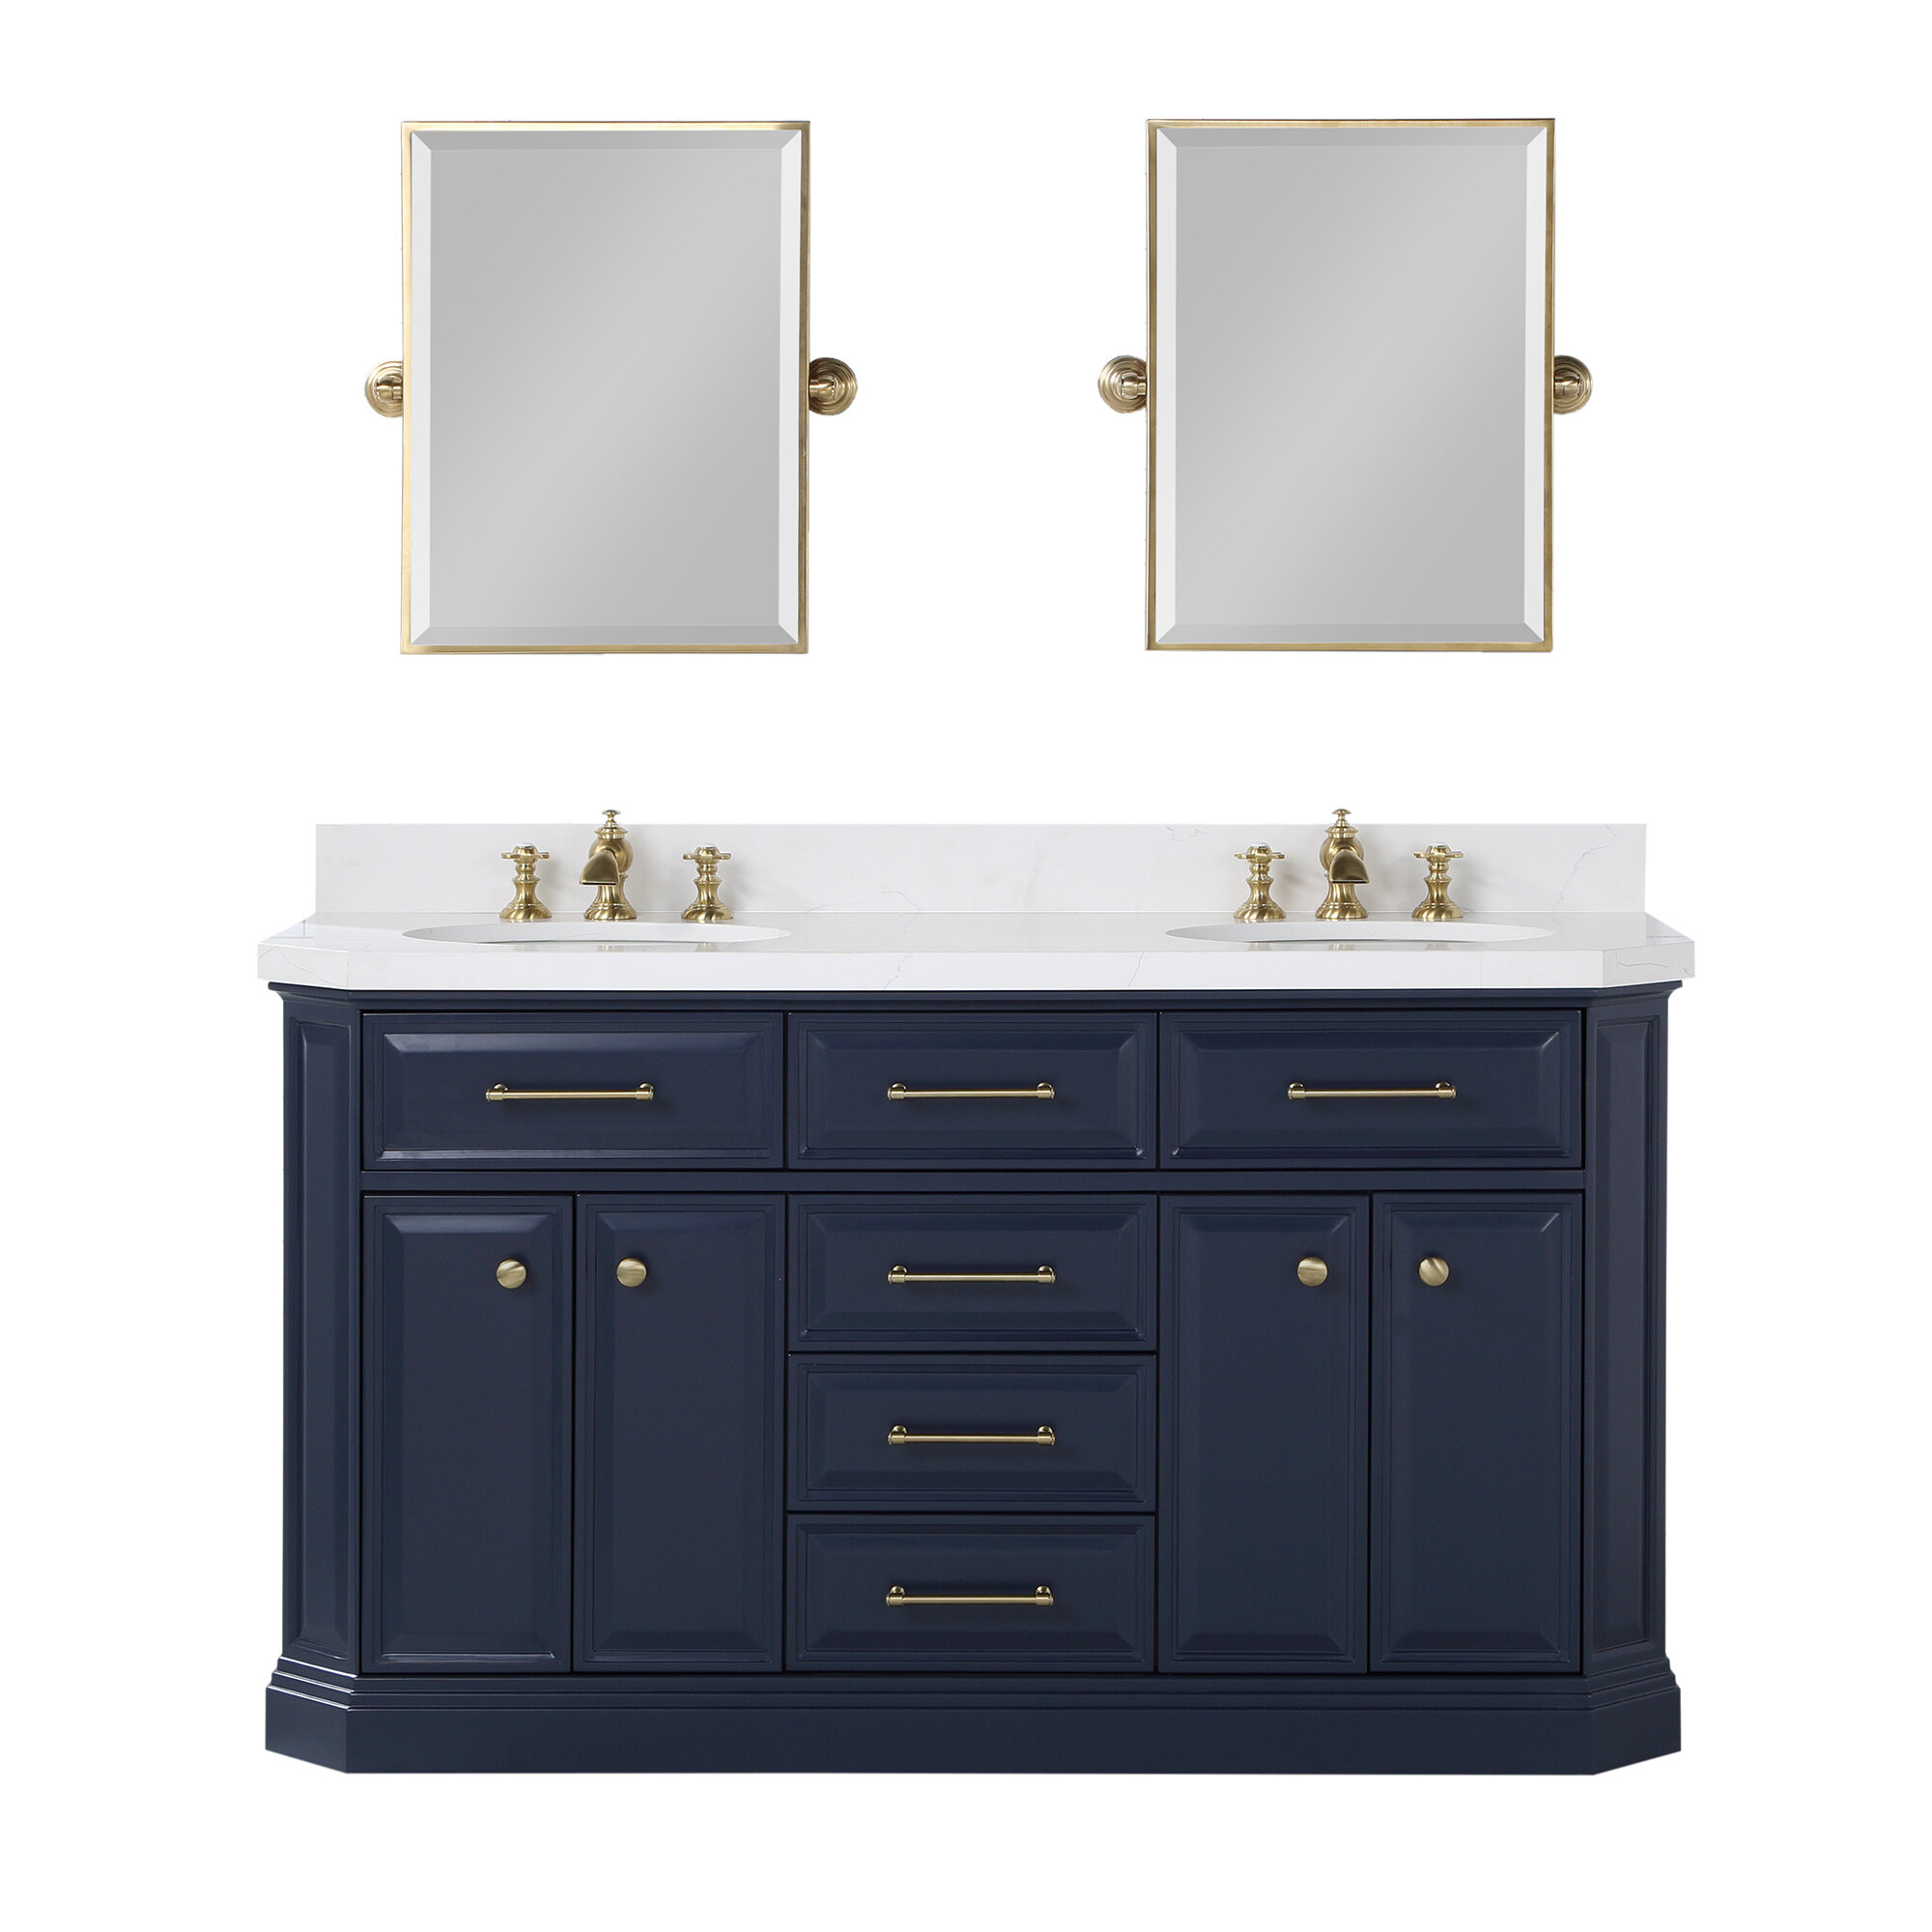 Gold Flamingo Caius 60 In Double Sink White Quartz Countertop Vanity In Monarch Blue With Waterfall Faucets And Mirrors Wayfair